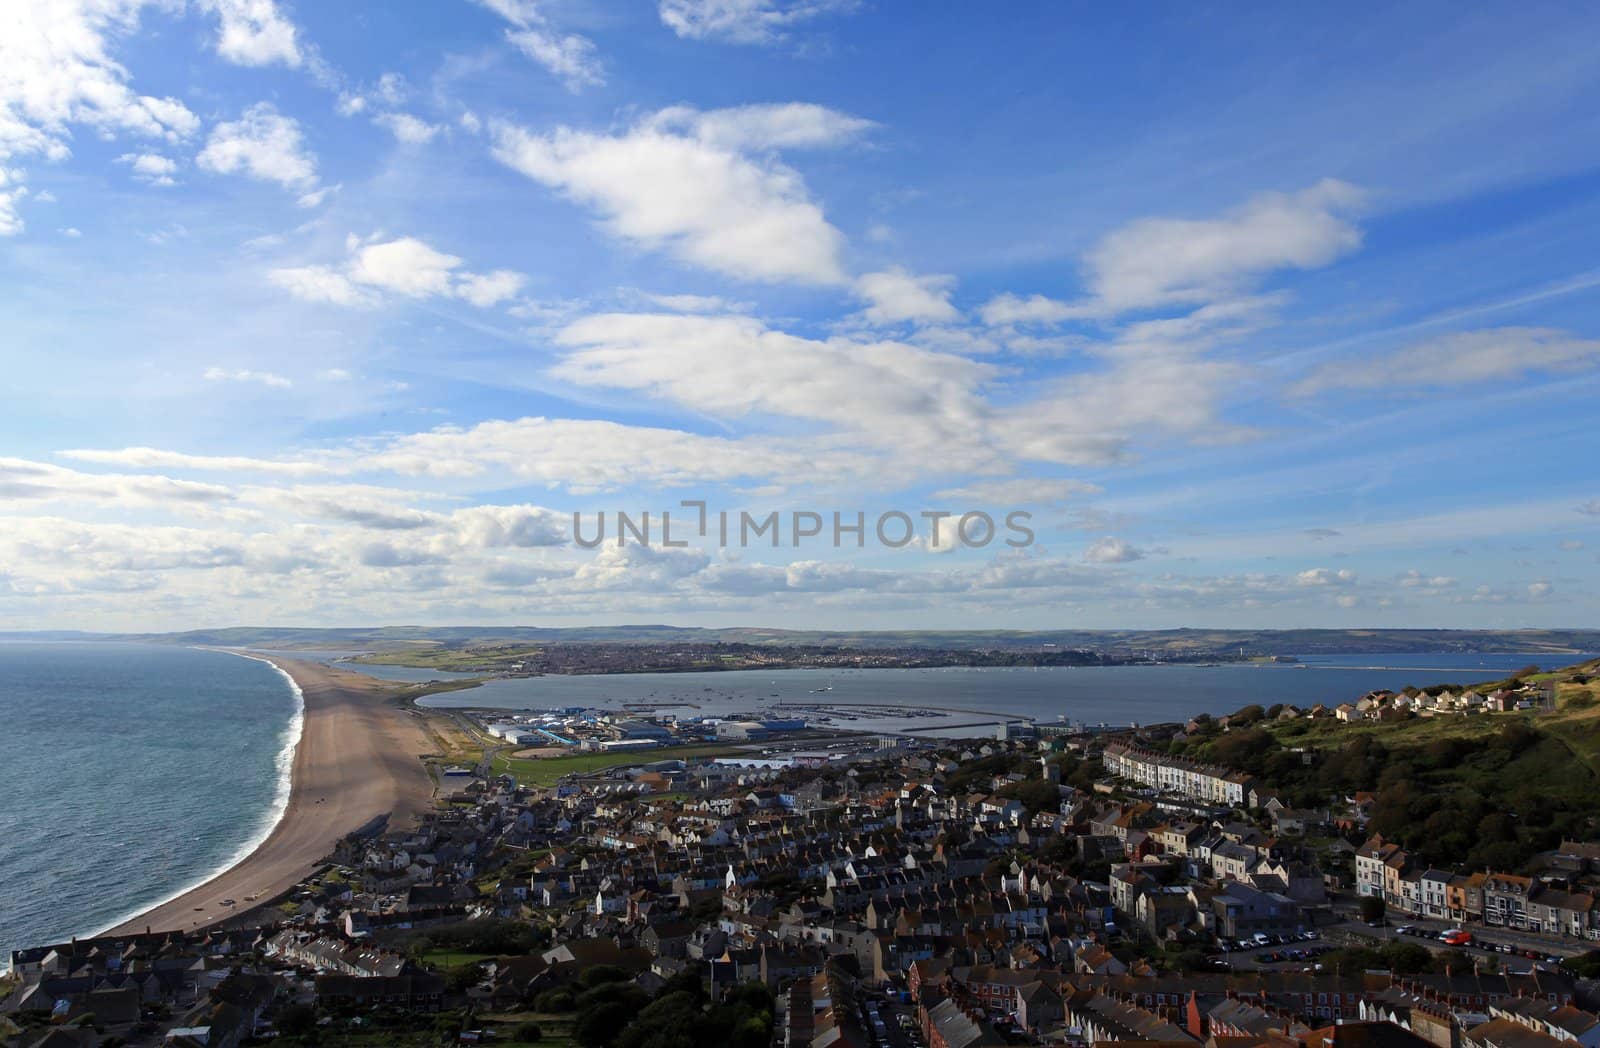 Chesil beach and Weymouth harbour Dorset home of the 2012 olympic sailing